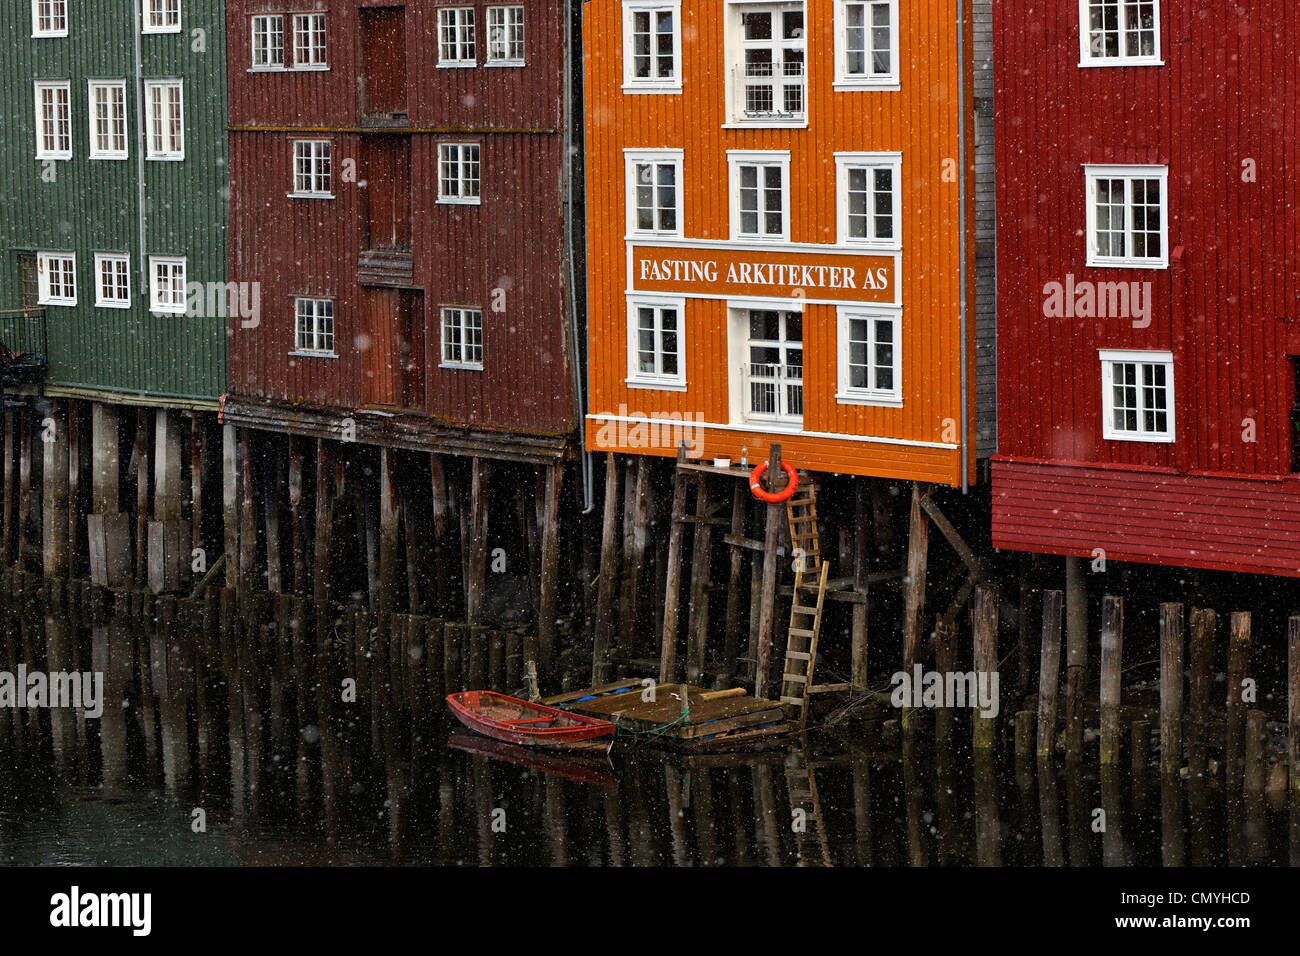 Norway, County of Sor Trondelag, Trondheim, Former warehouses, houses on piles Stock Photo